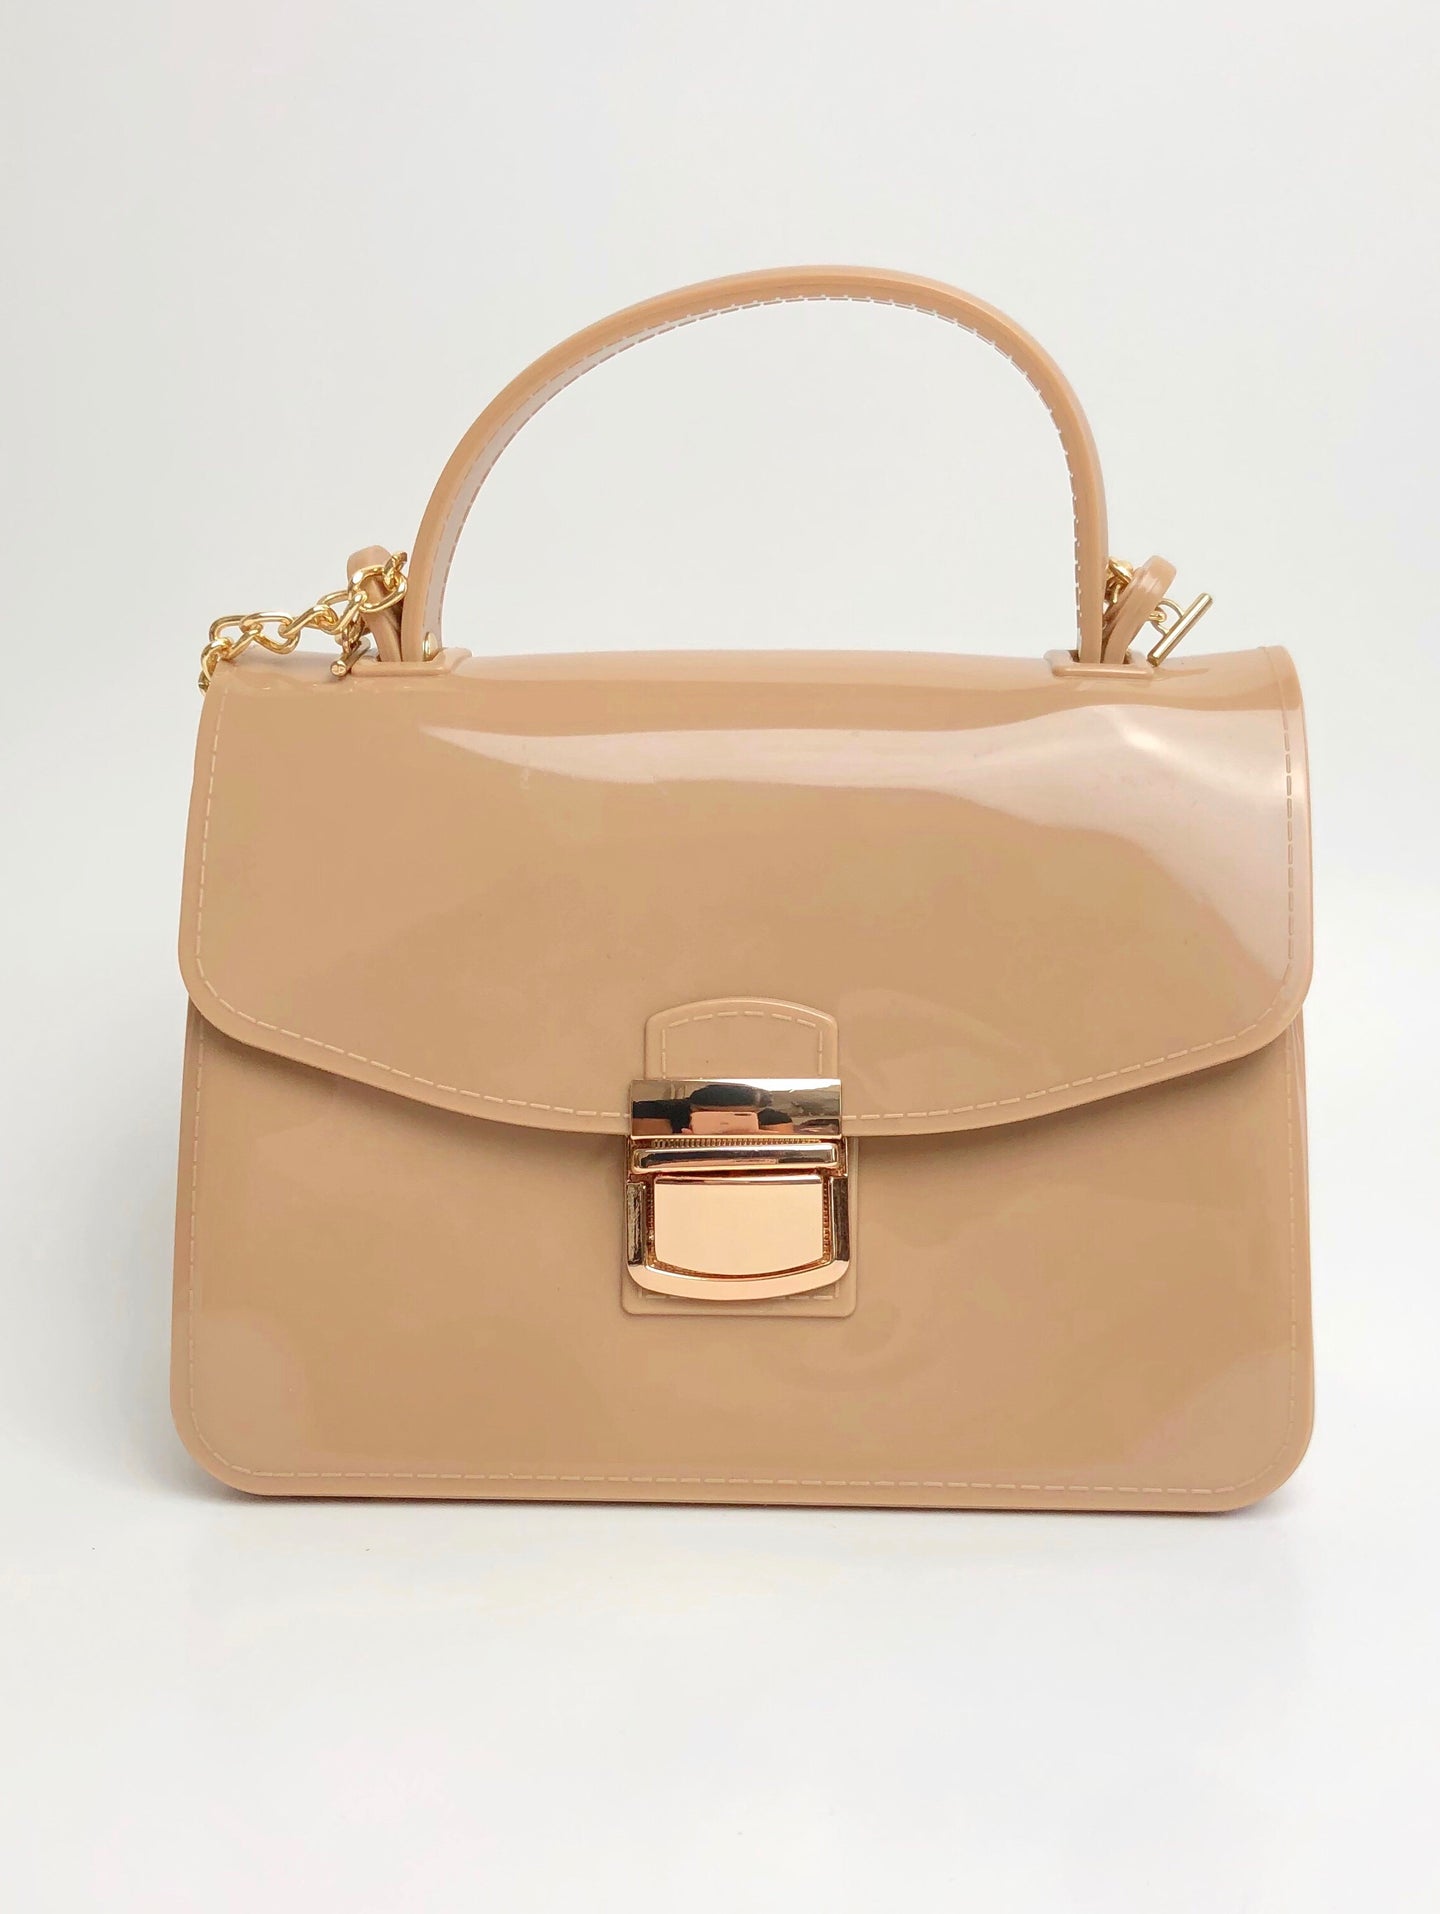 SMALL JELLY CROSSBODY BAG - TAUPE